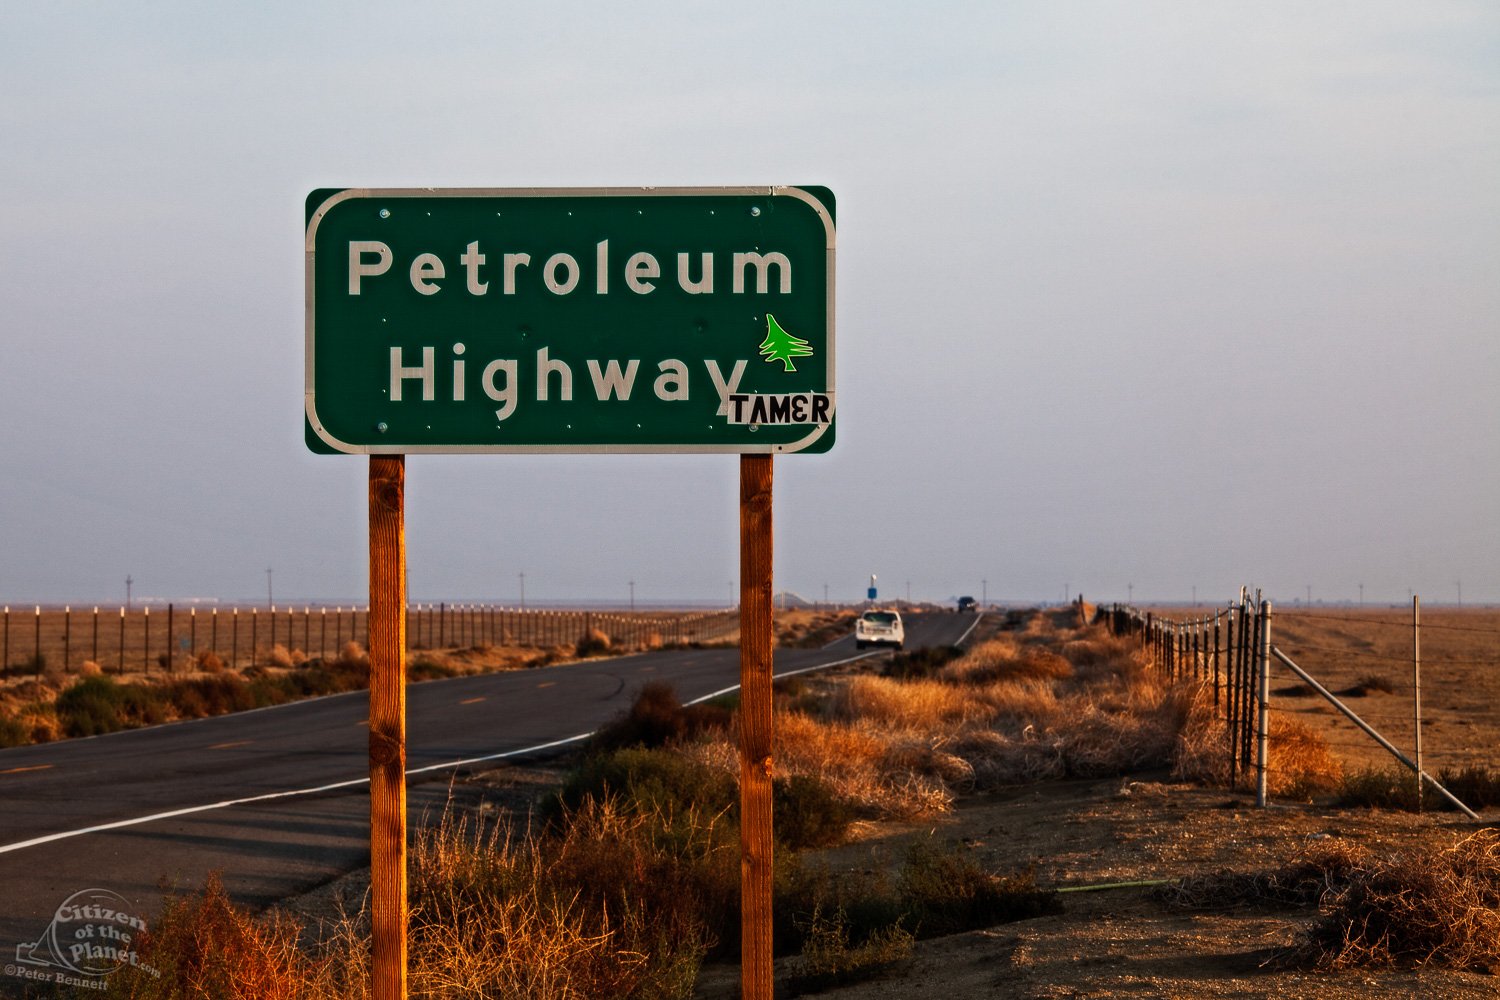  The Petroleum Highway (state route 33) runs north-south through the Belridge oil field in the Monterey Shale. Kern County. 